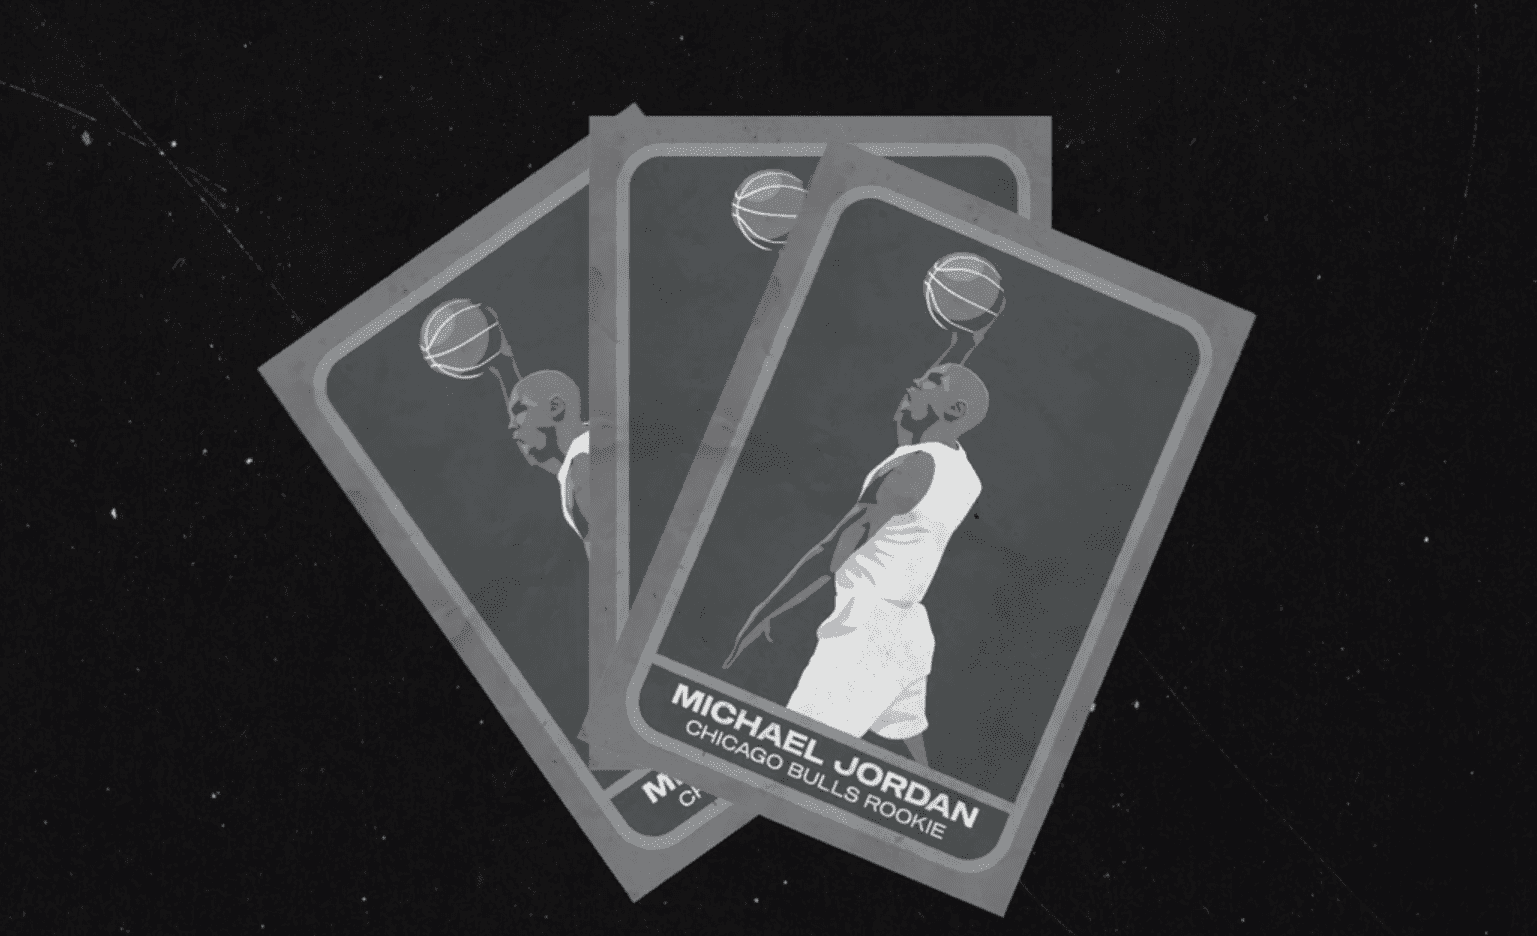 MJ: From Playing Cards to Trading Cards